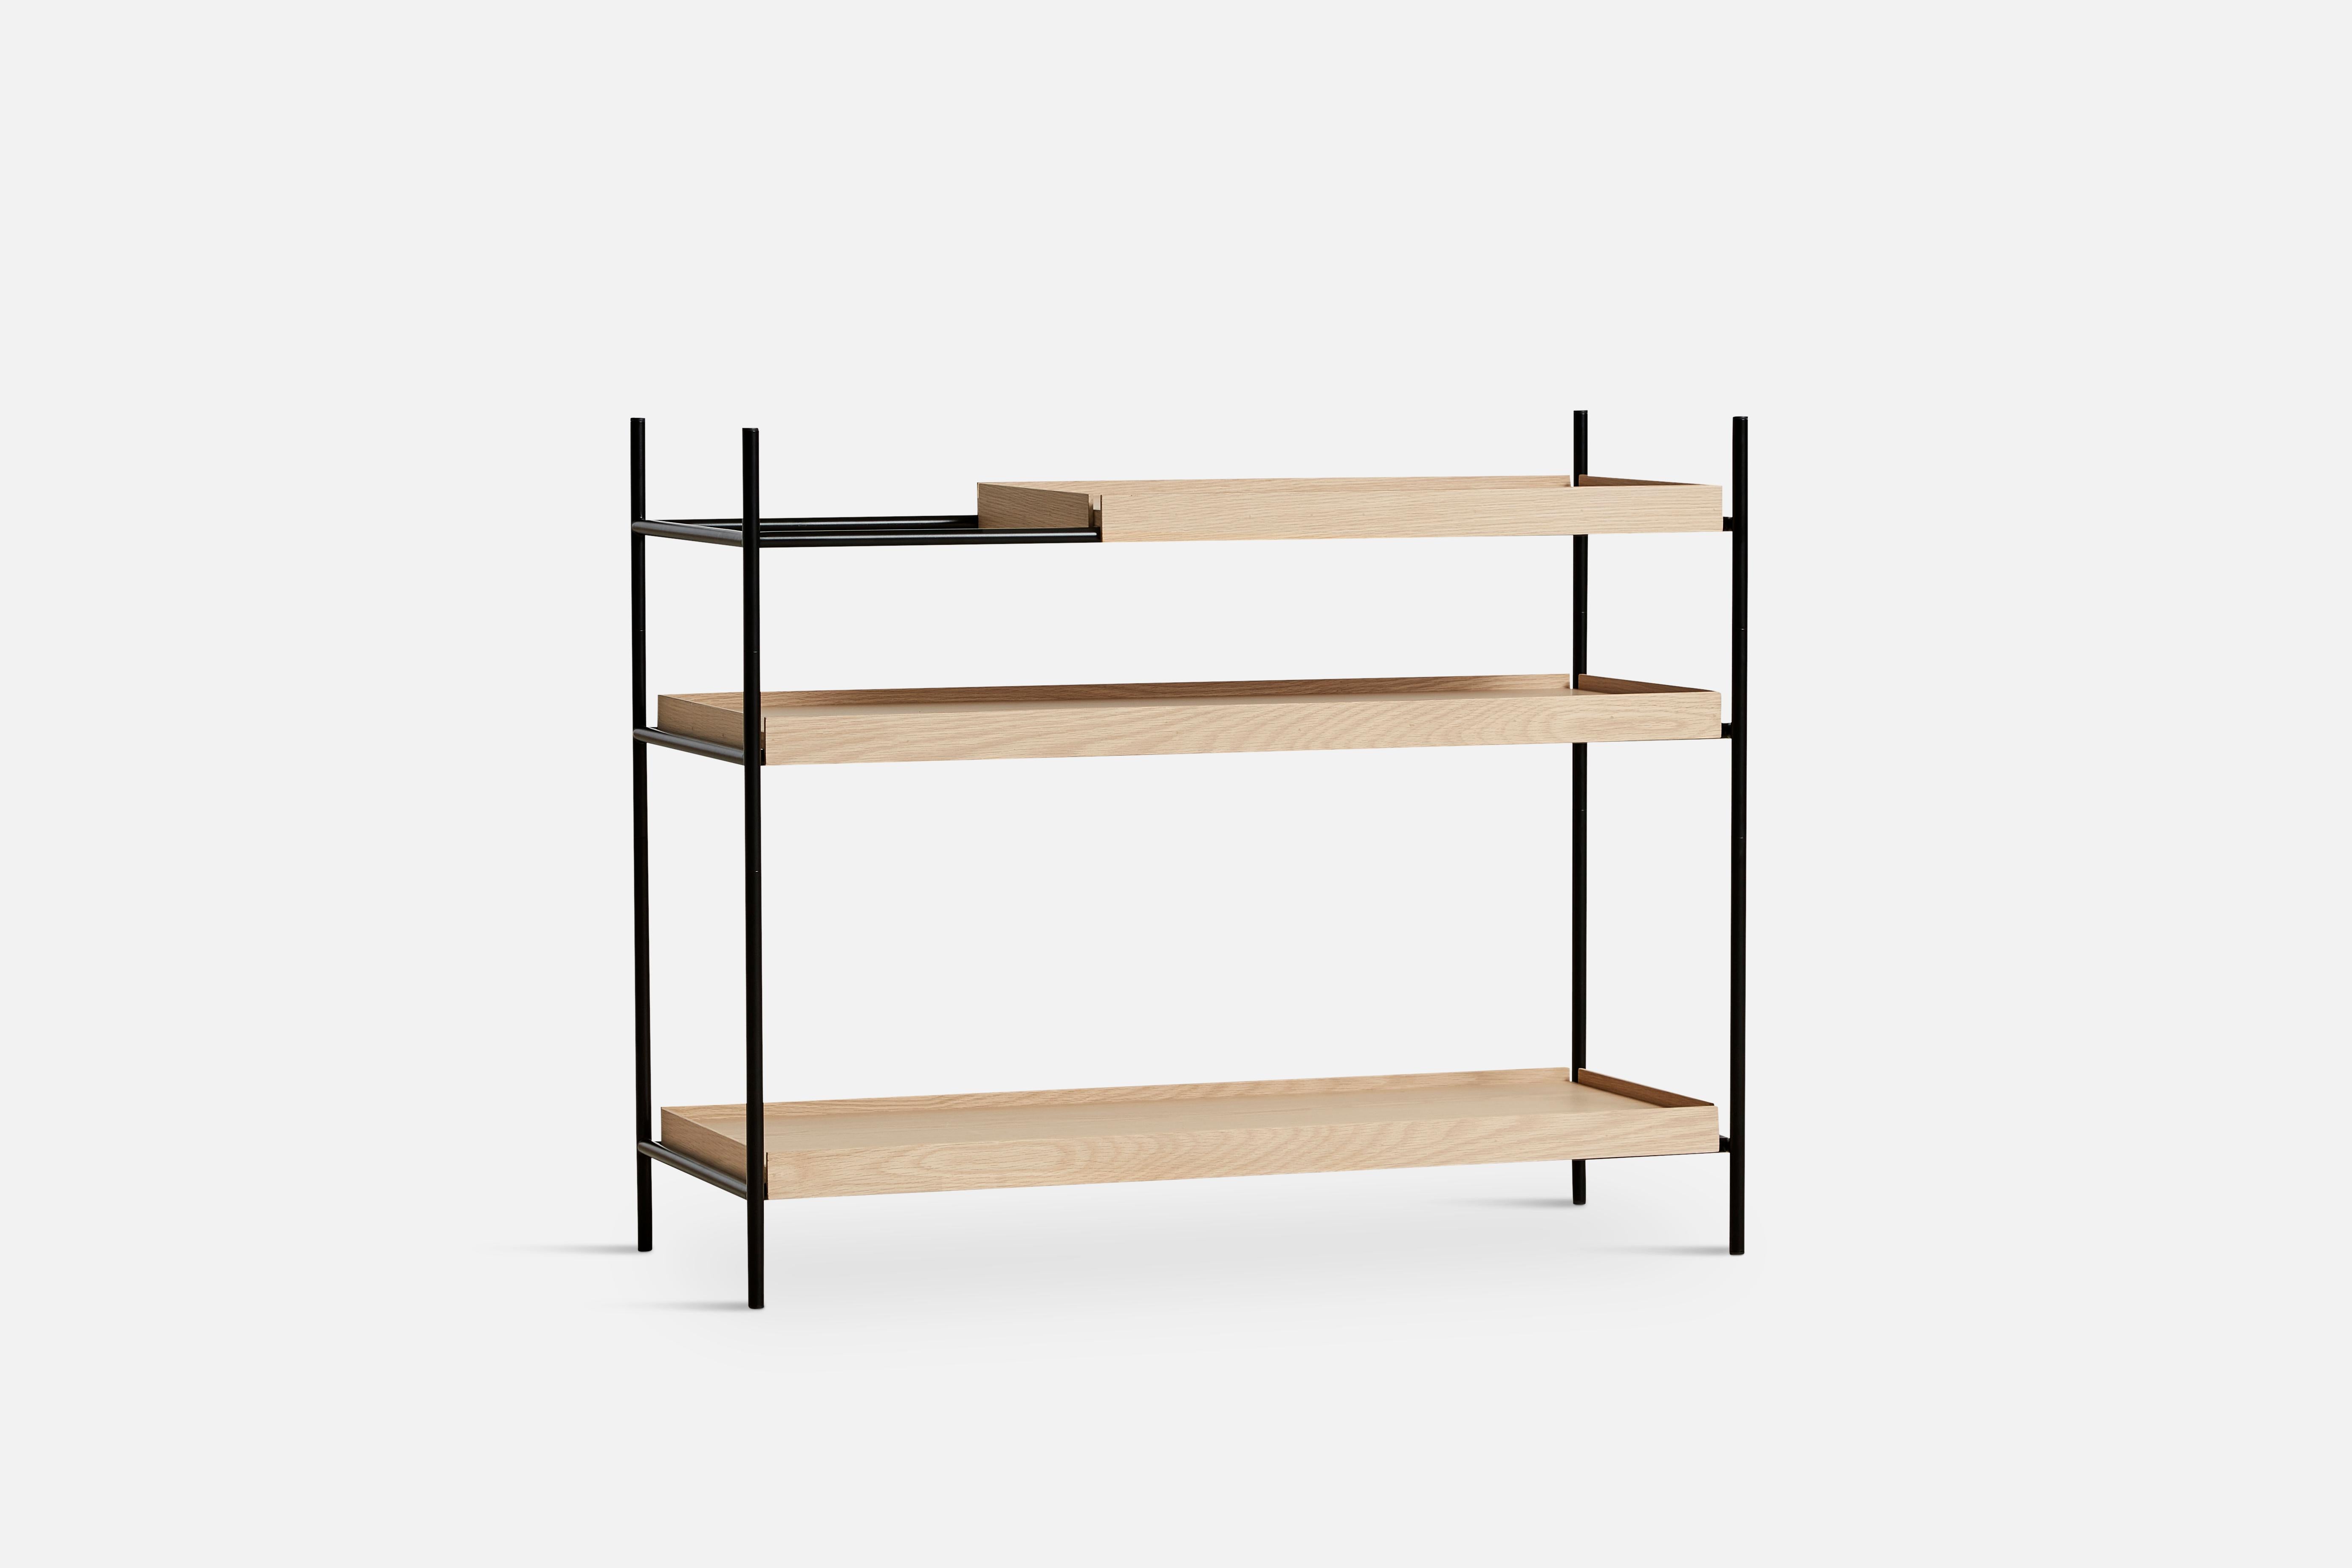 Low Oak Tray shelf by Hanne Willmann.
Materials: Metal, oak.
Dimensions: D 40 x W 100 x H 81 cm.
Also available in different tray conbinations and 2 sizes: H81, H 201 cm.

Hanne Willmann is a dynamic German designer with her own